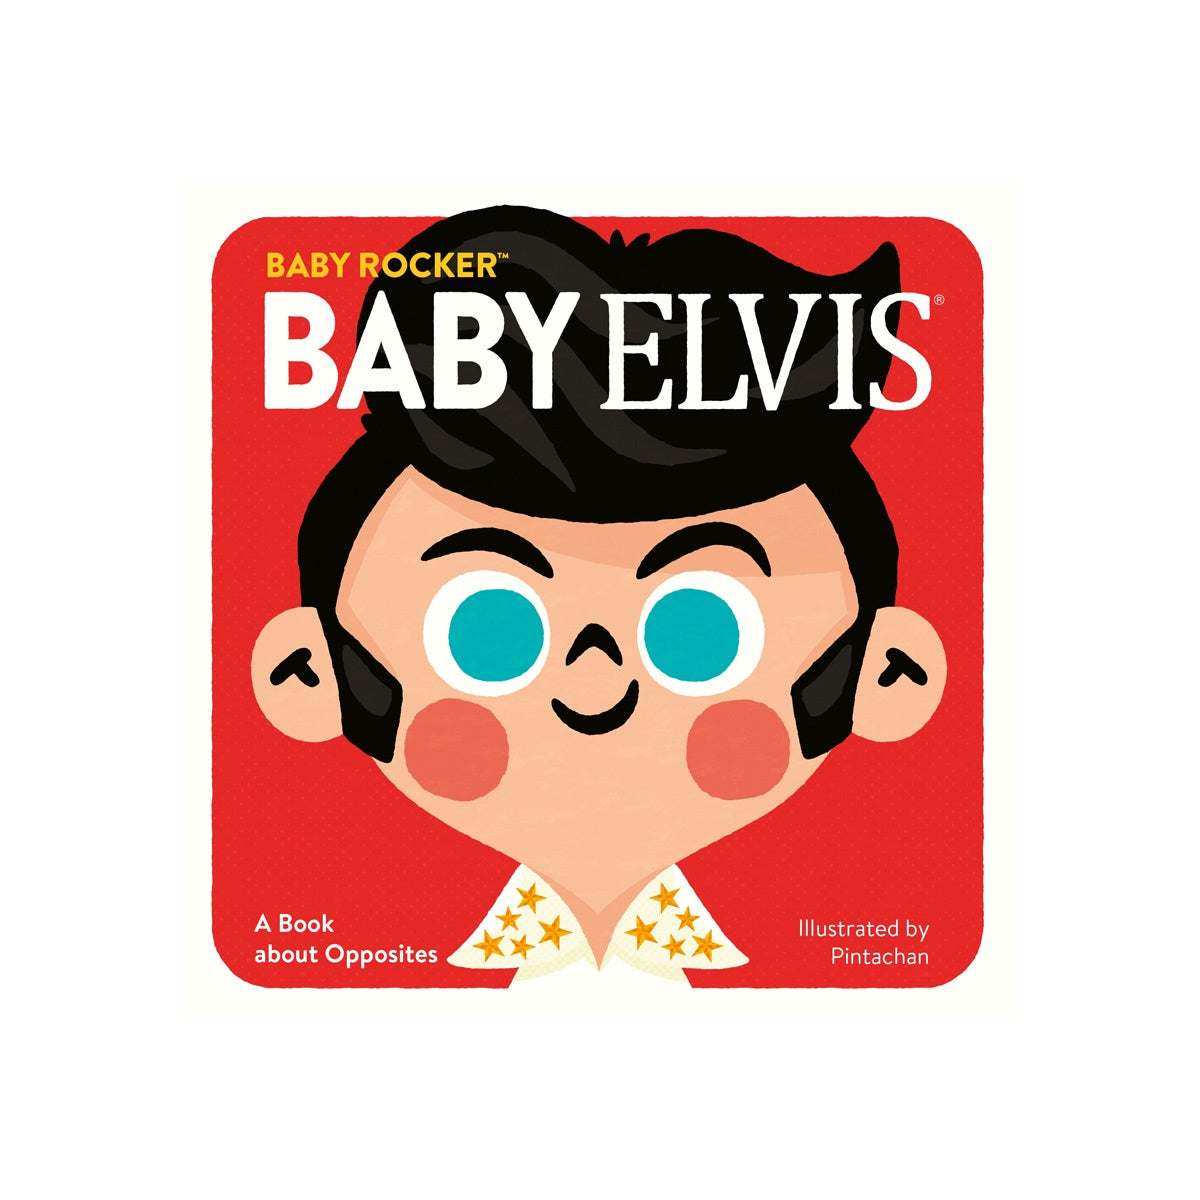 Baby Elvis A Book About Opposites